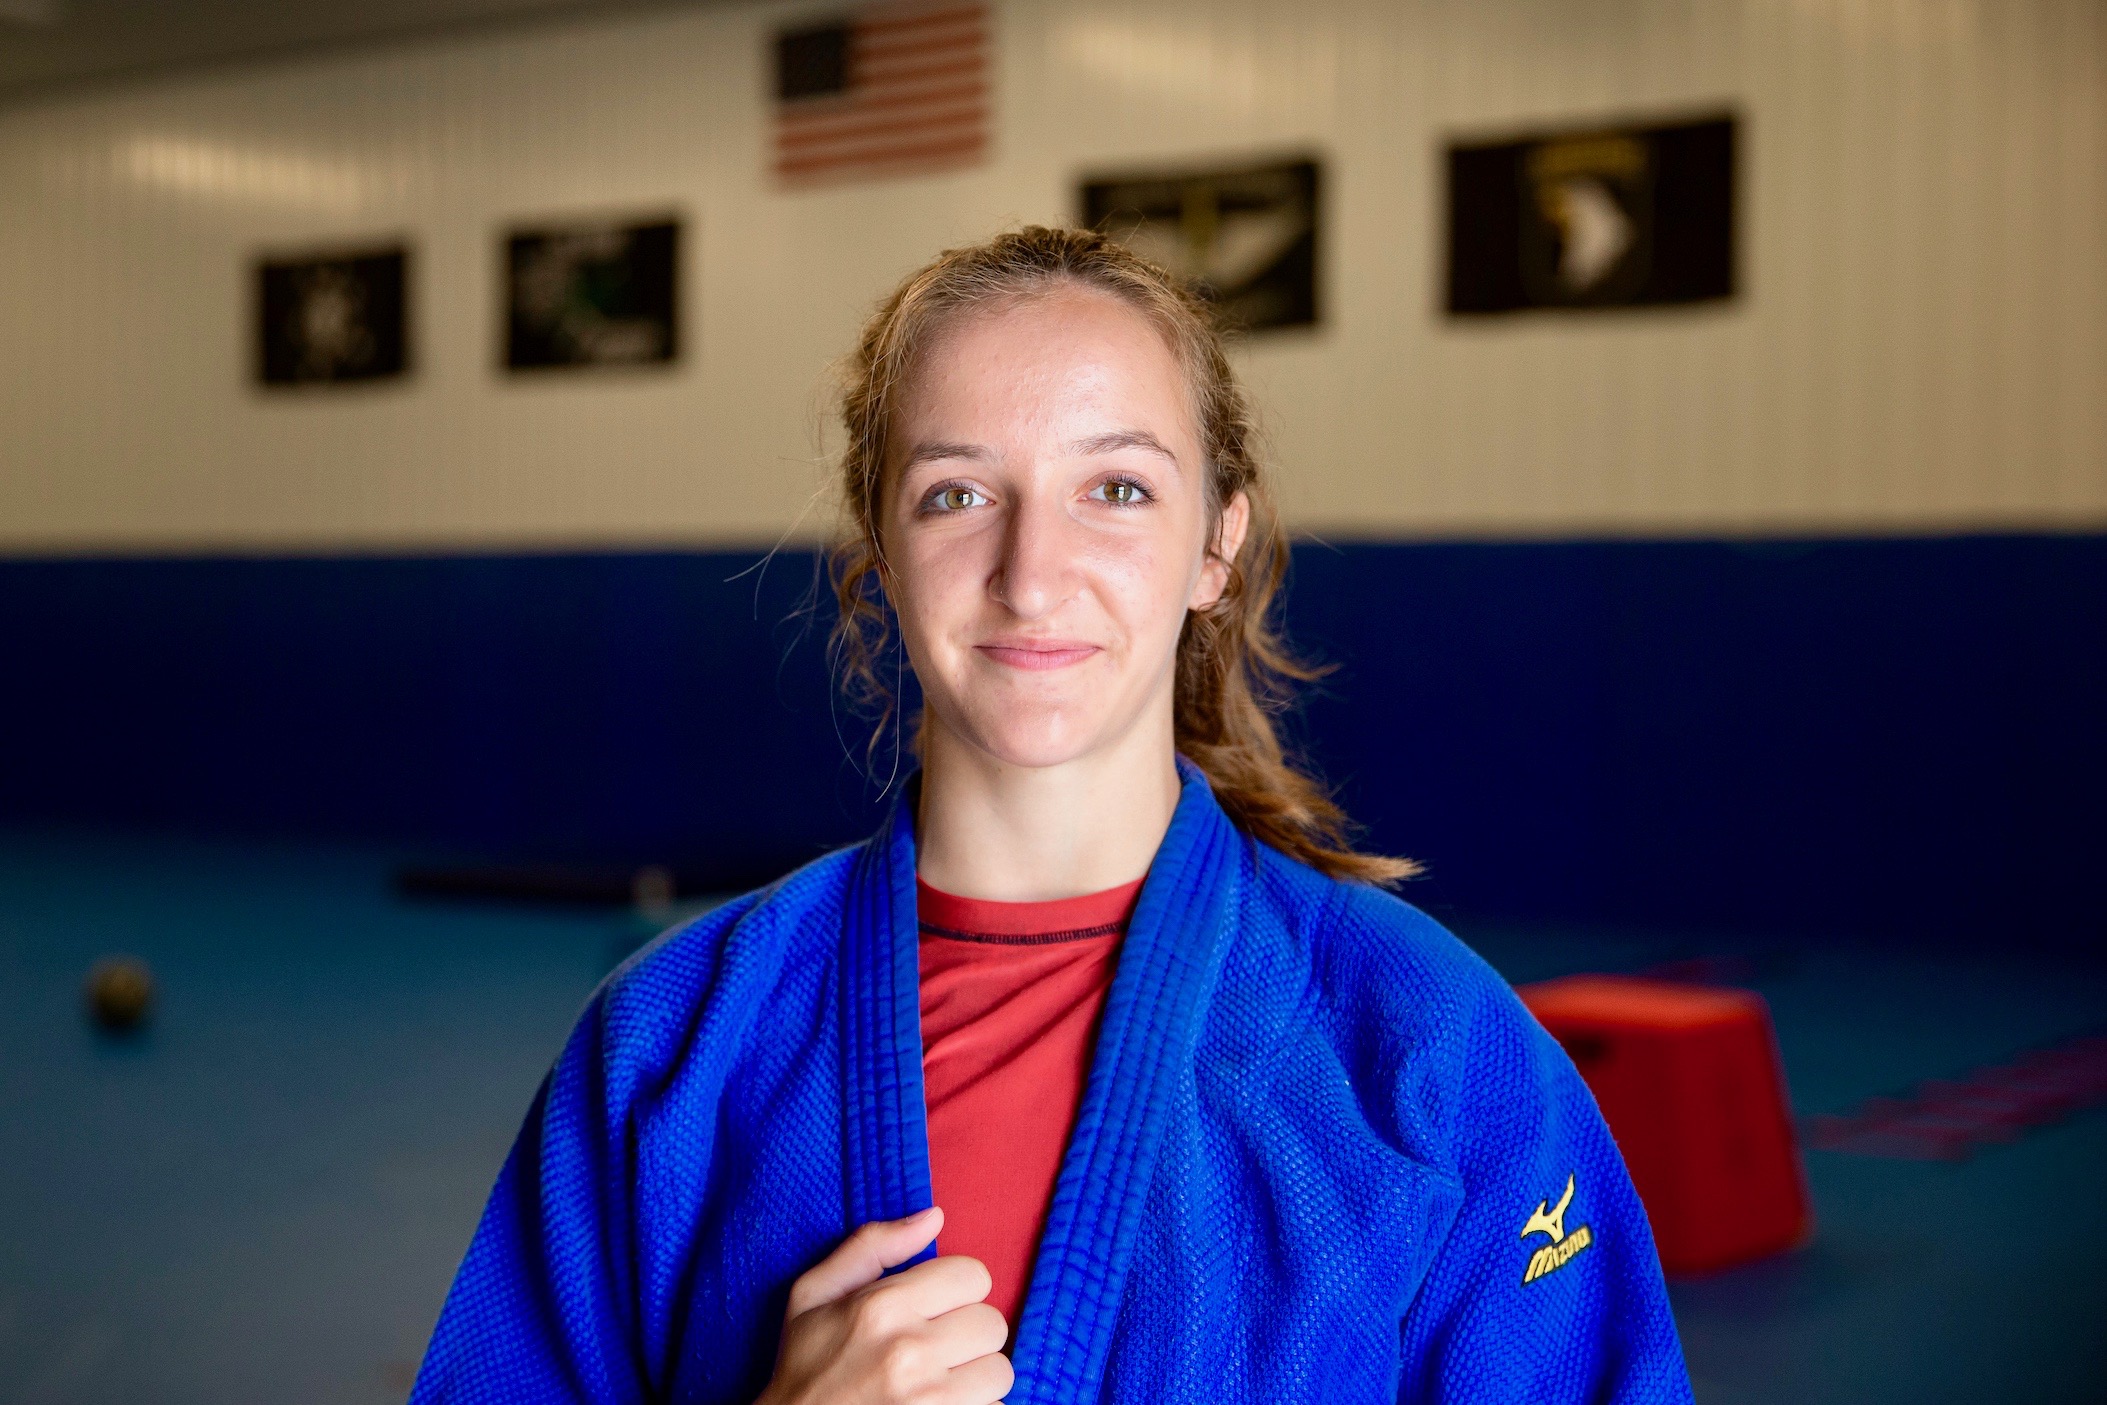 Austin Peay’s Brinna Lavelle will compete in judo July 6-7 at the World University Games in Naples, Italy.